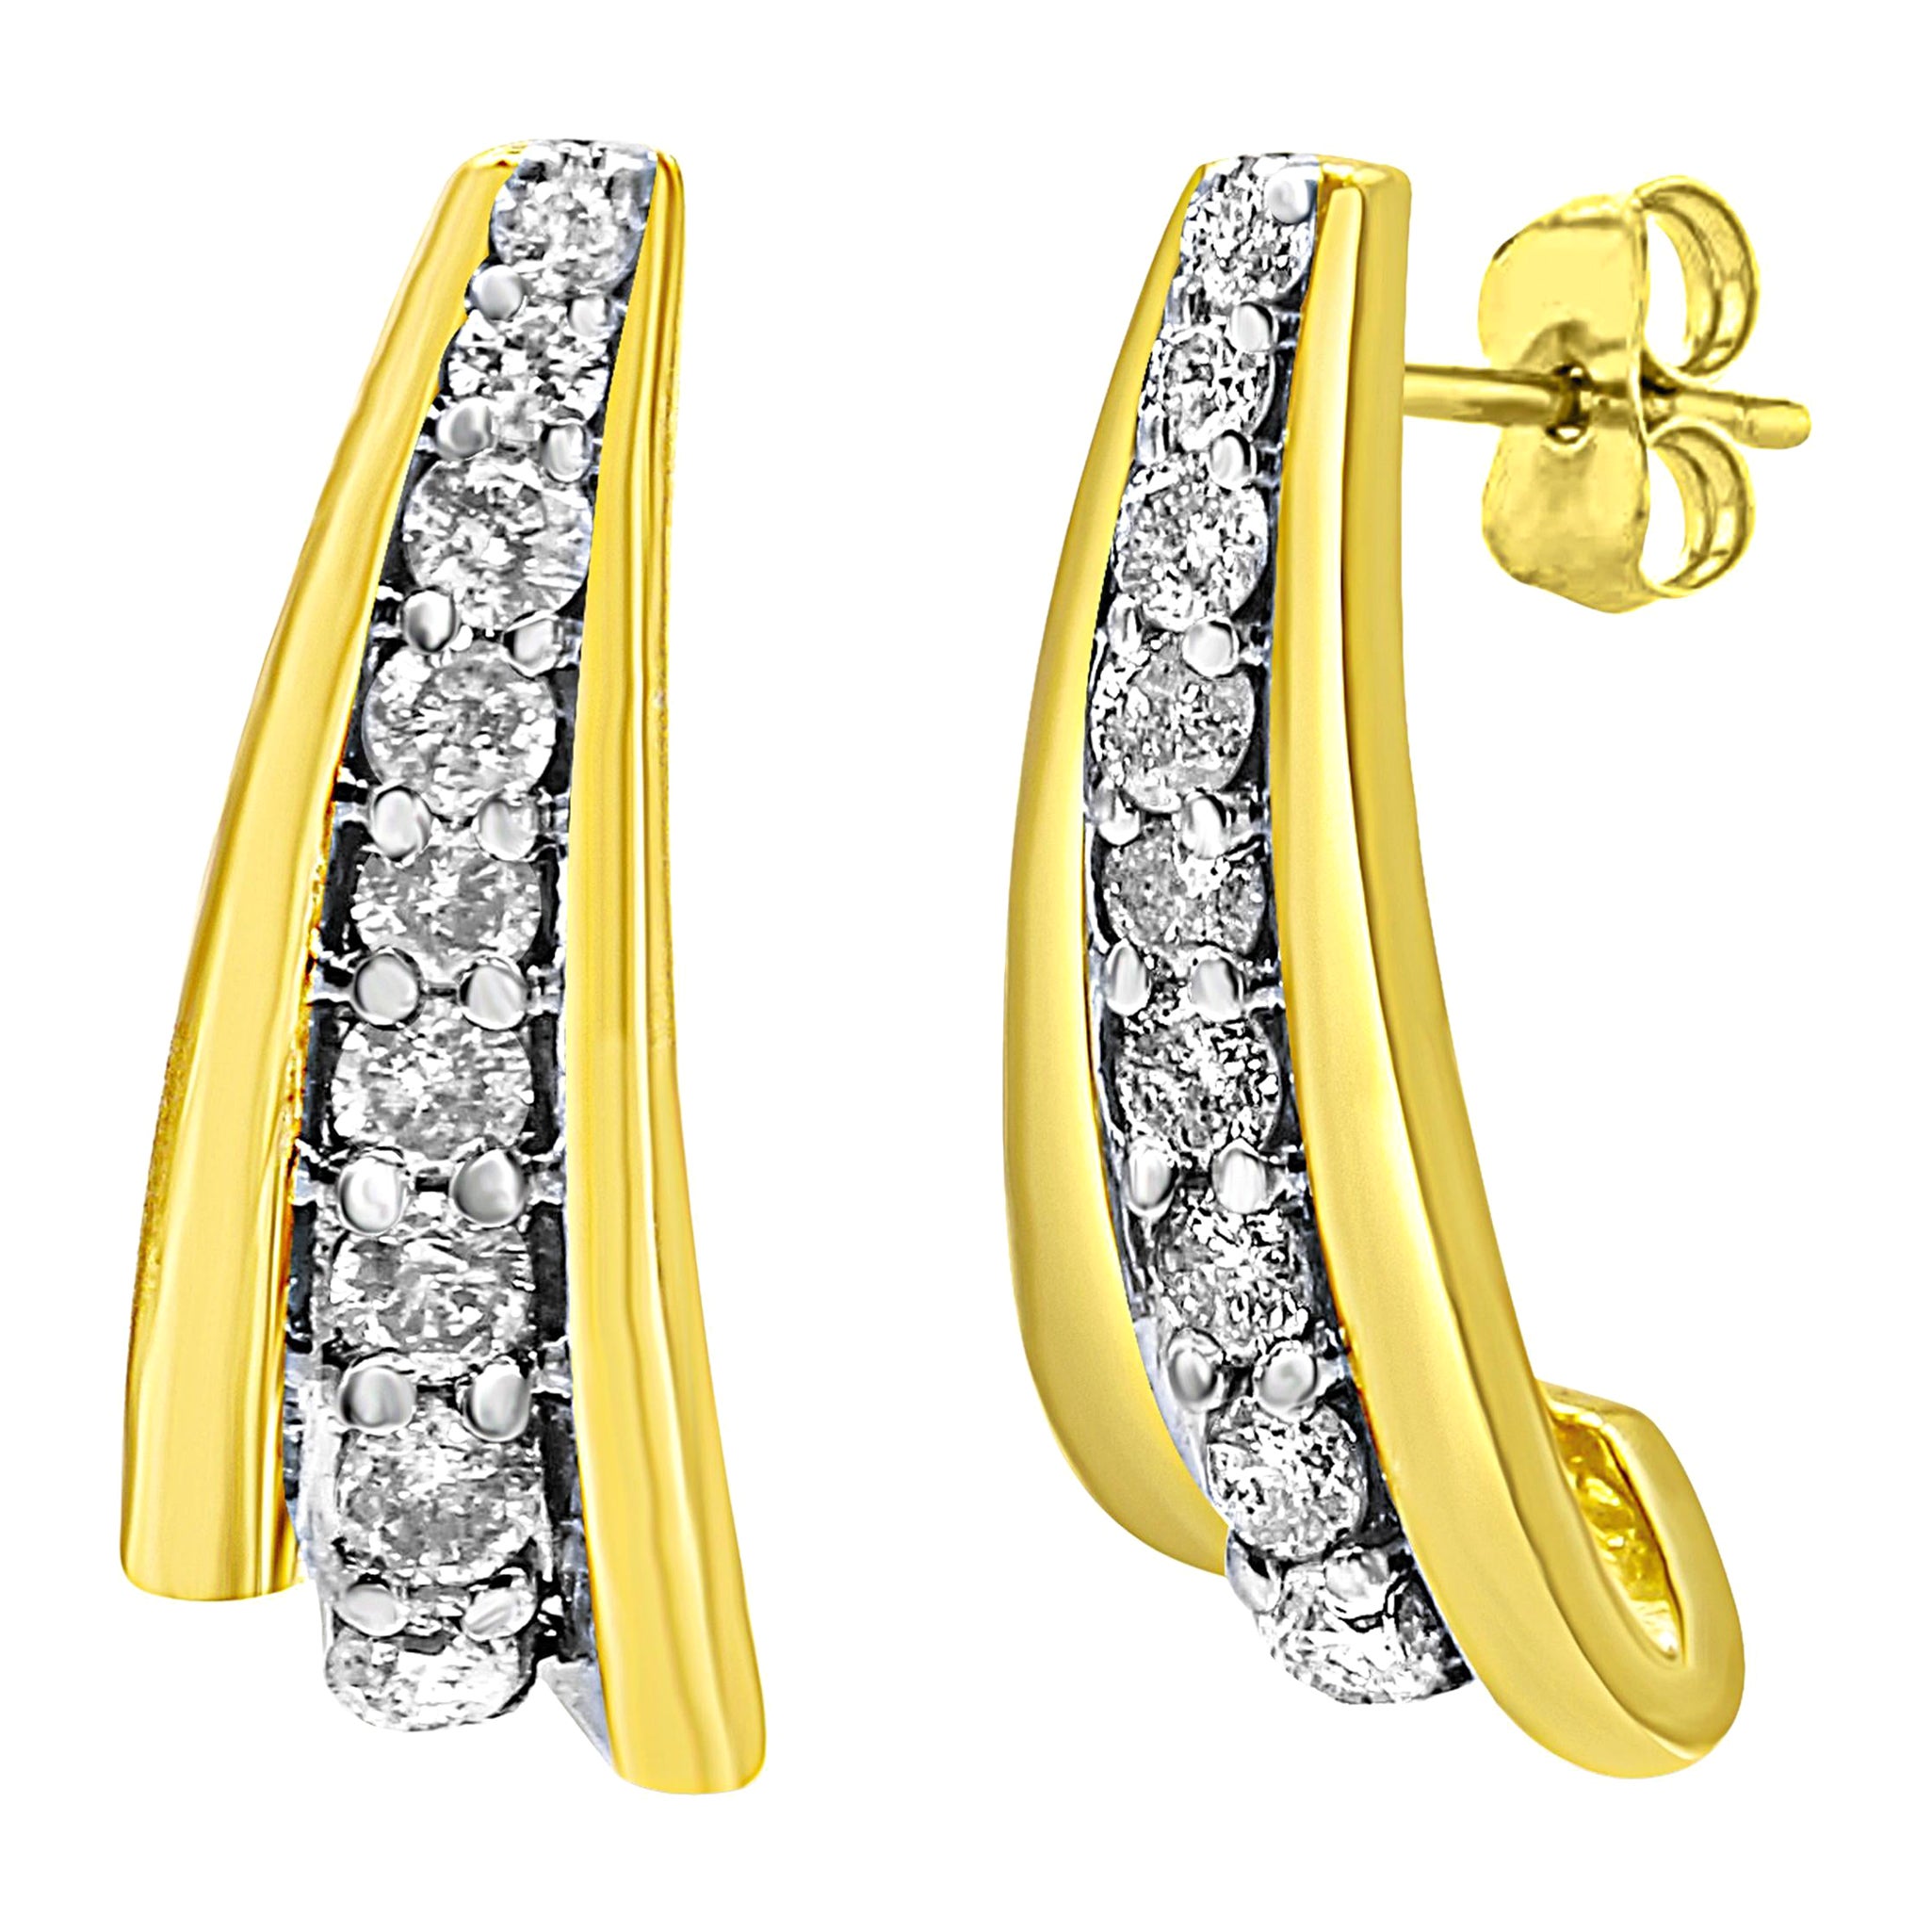 10K Yellow Gold Plated Sterling Silver 1/2 Carat Diamond Huggie Stud Earrings For Sale